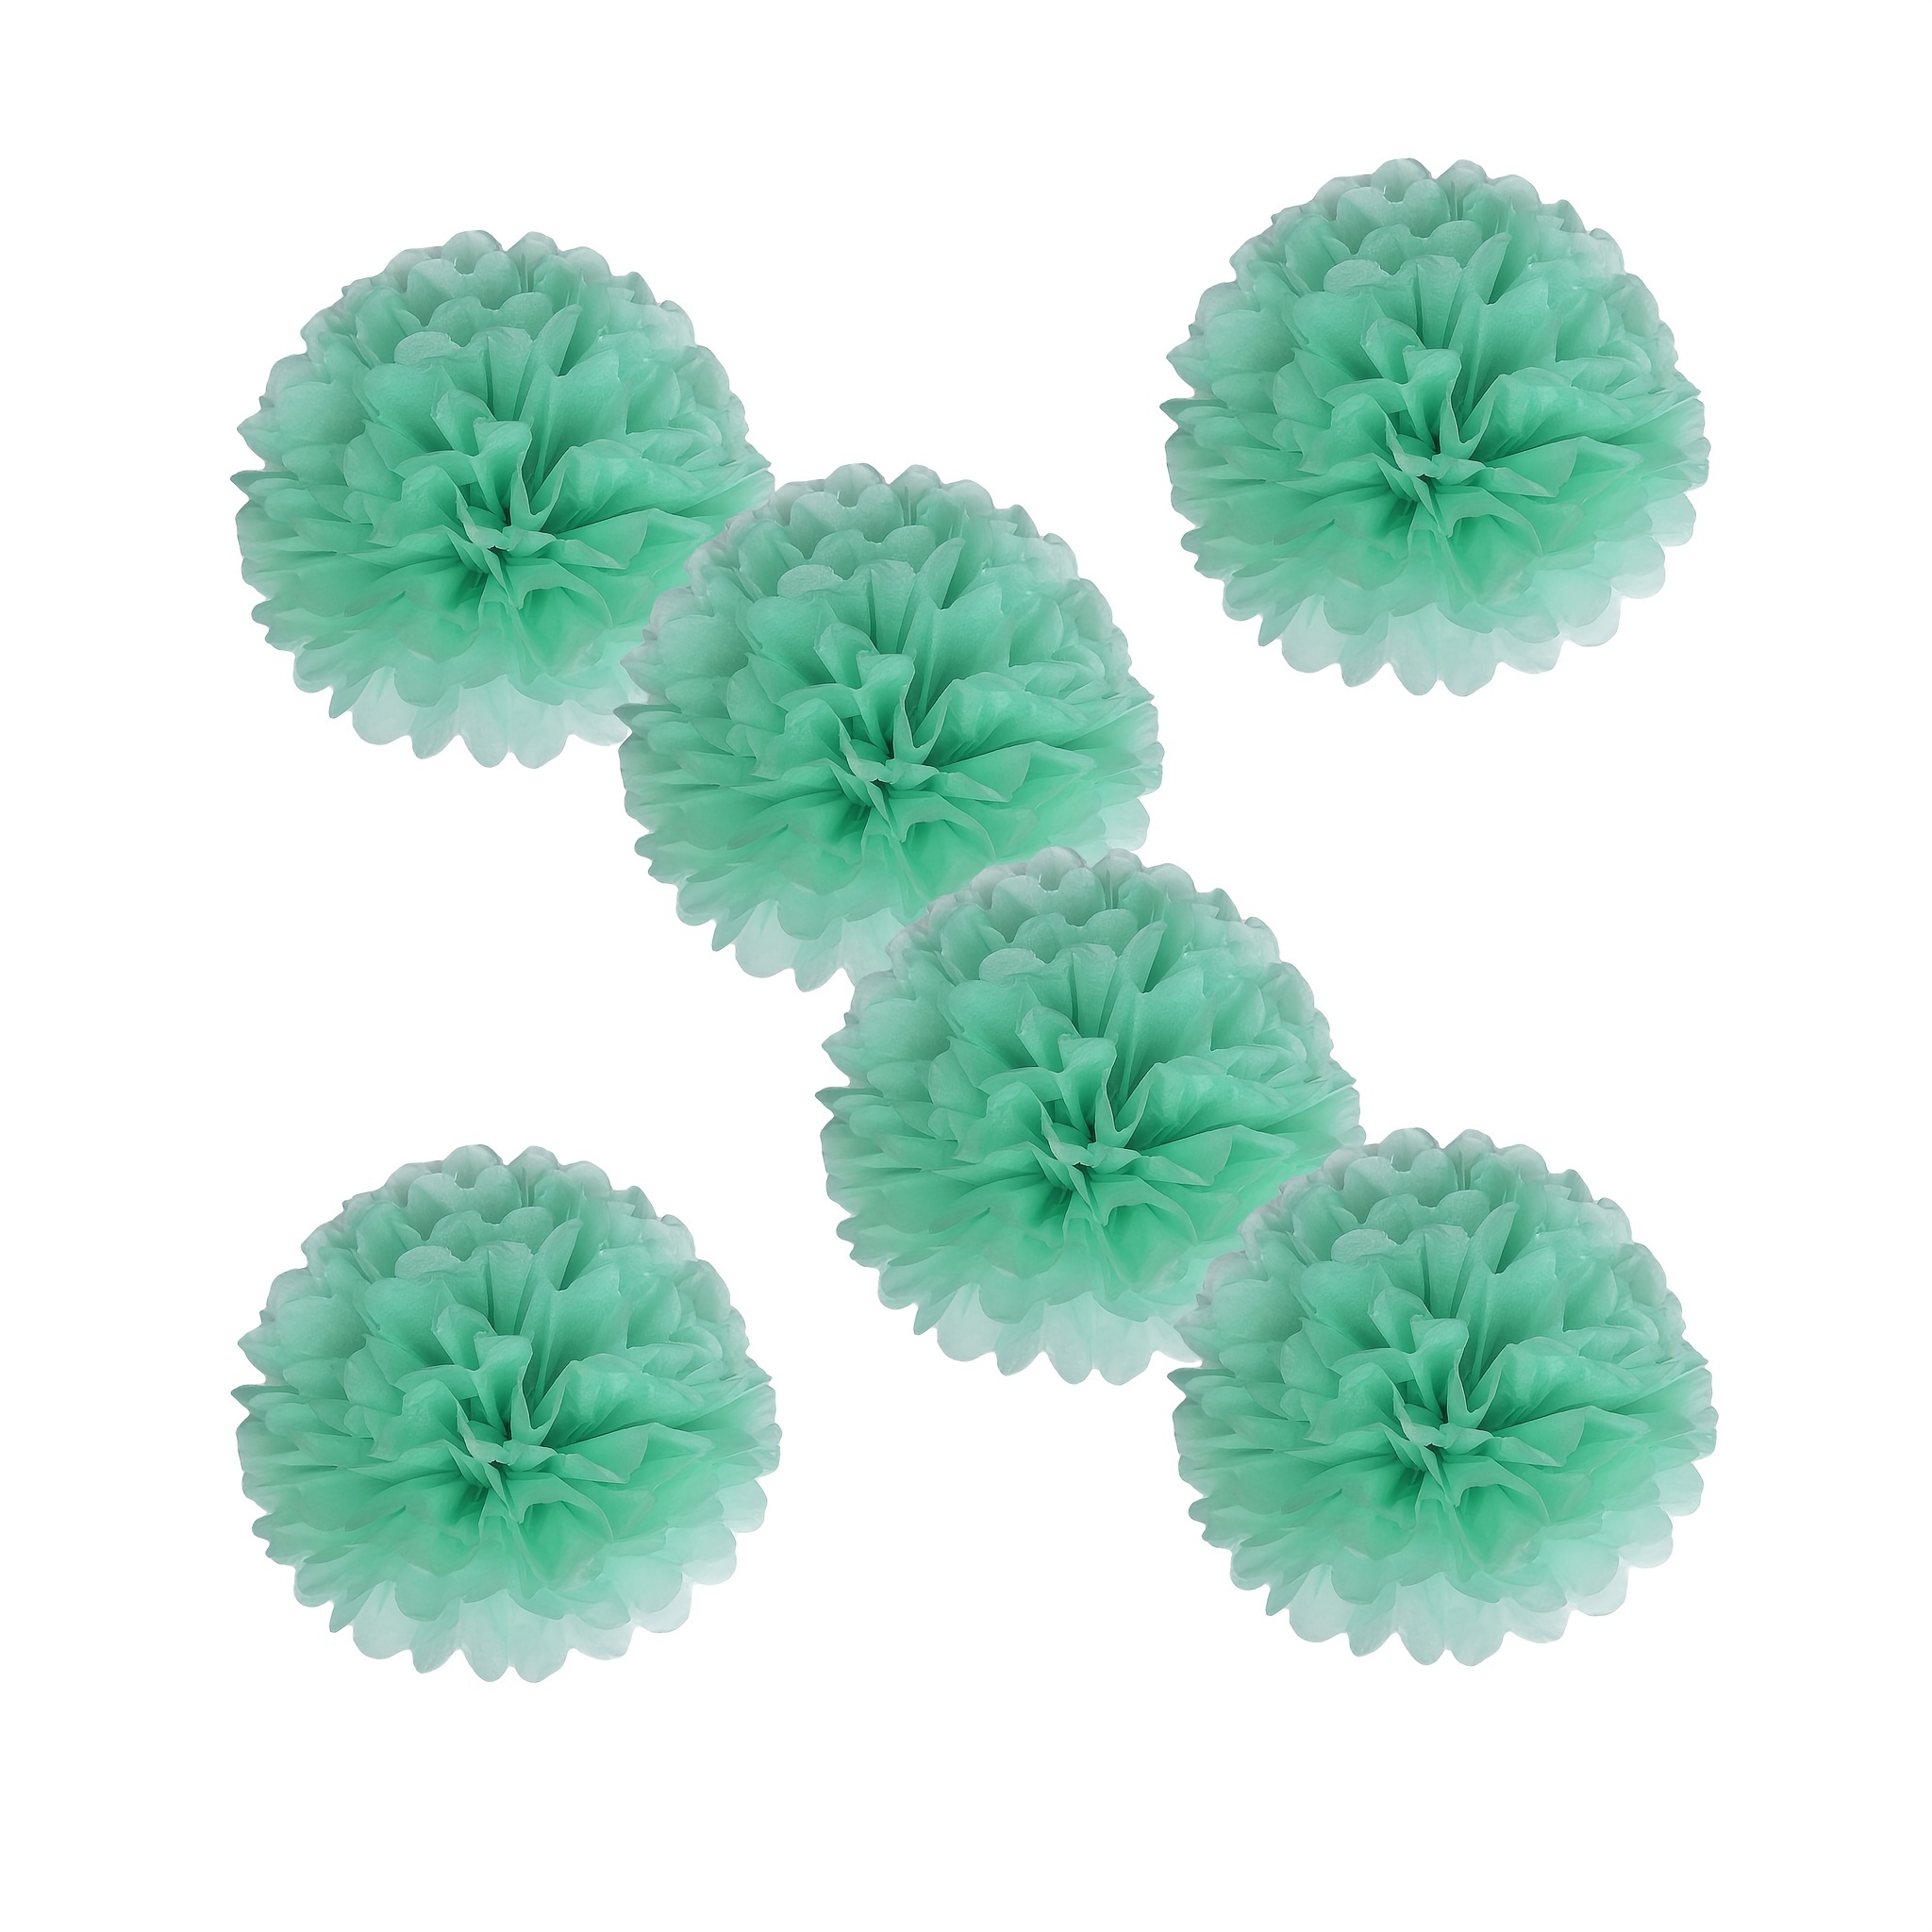 15pcs 25cm(10inch) Teal Green Tissue Paper Pom Poms Wedding Party